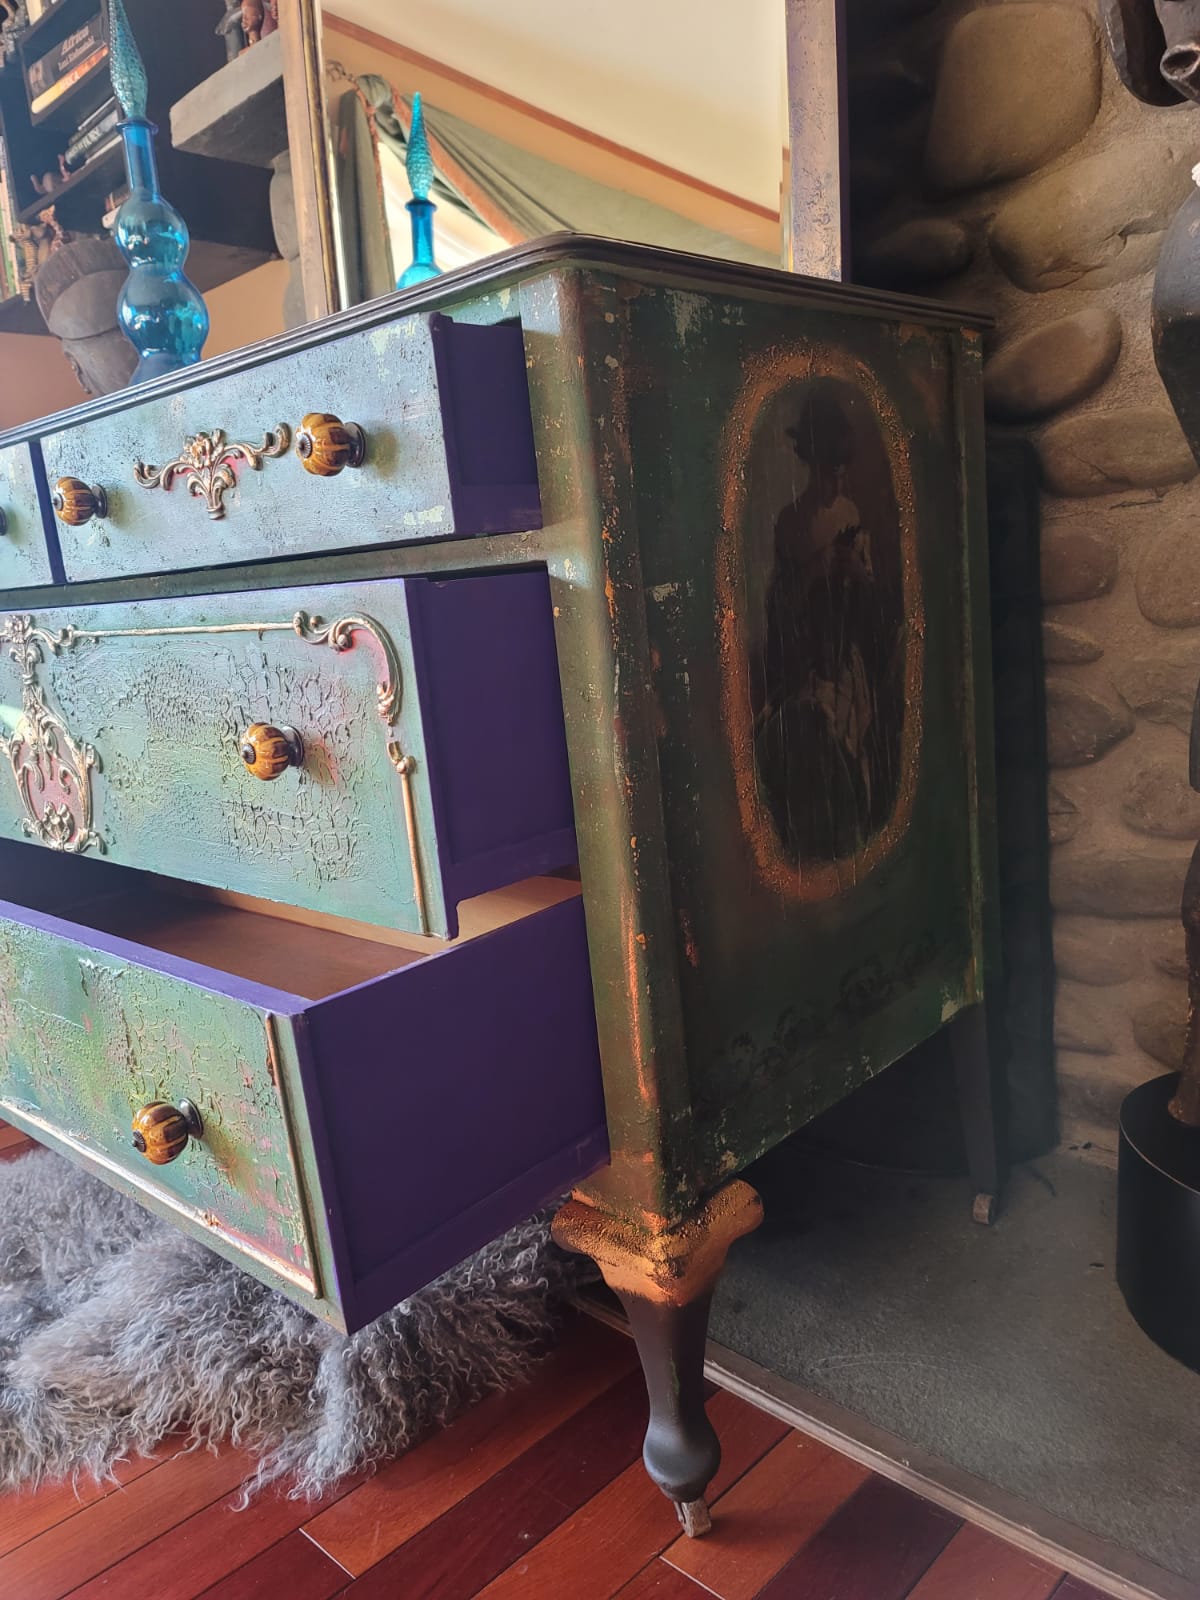 Green and Purple Dresser with Mirror